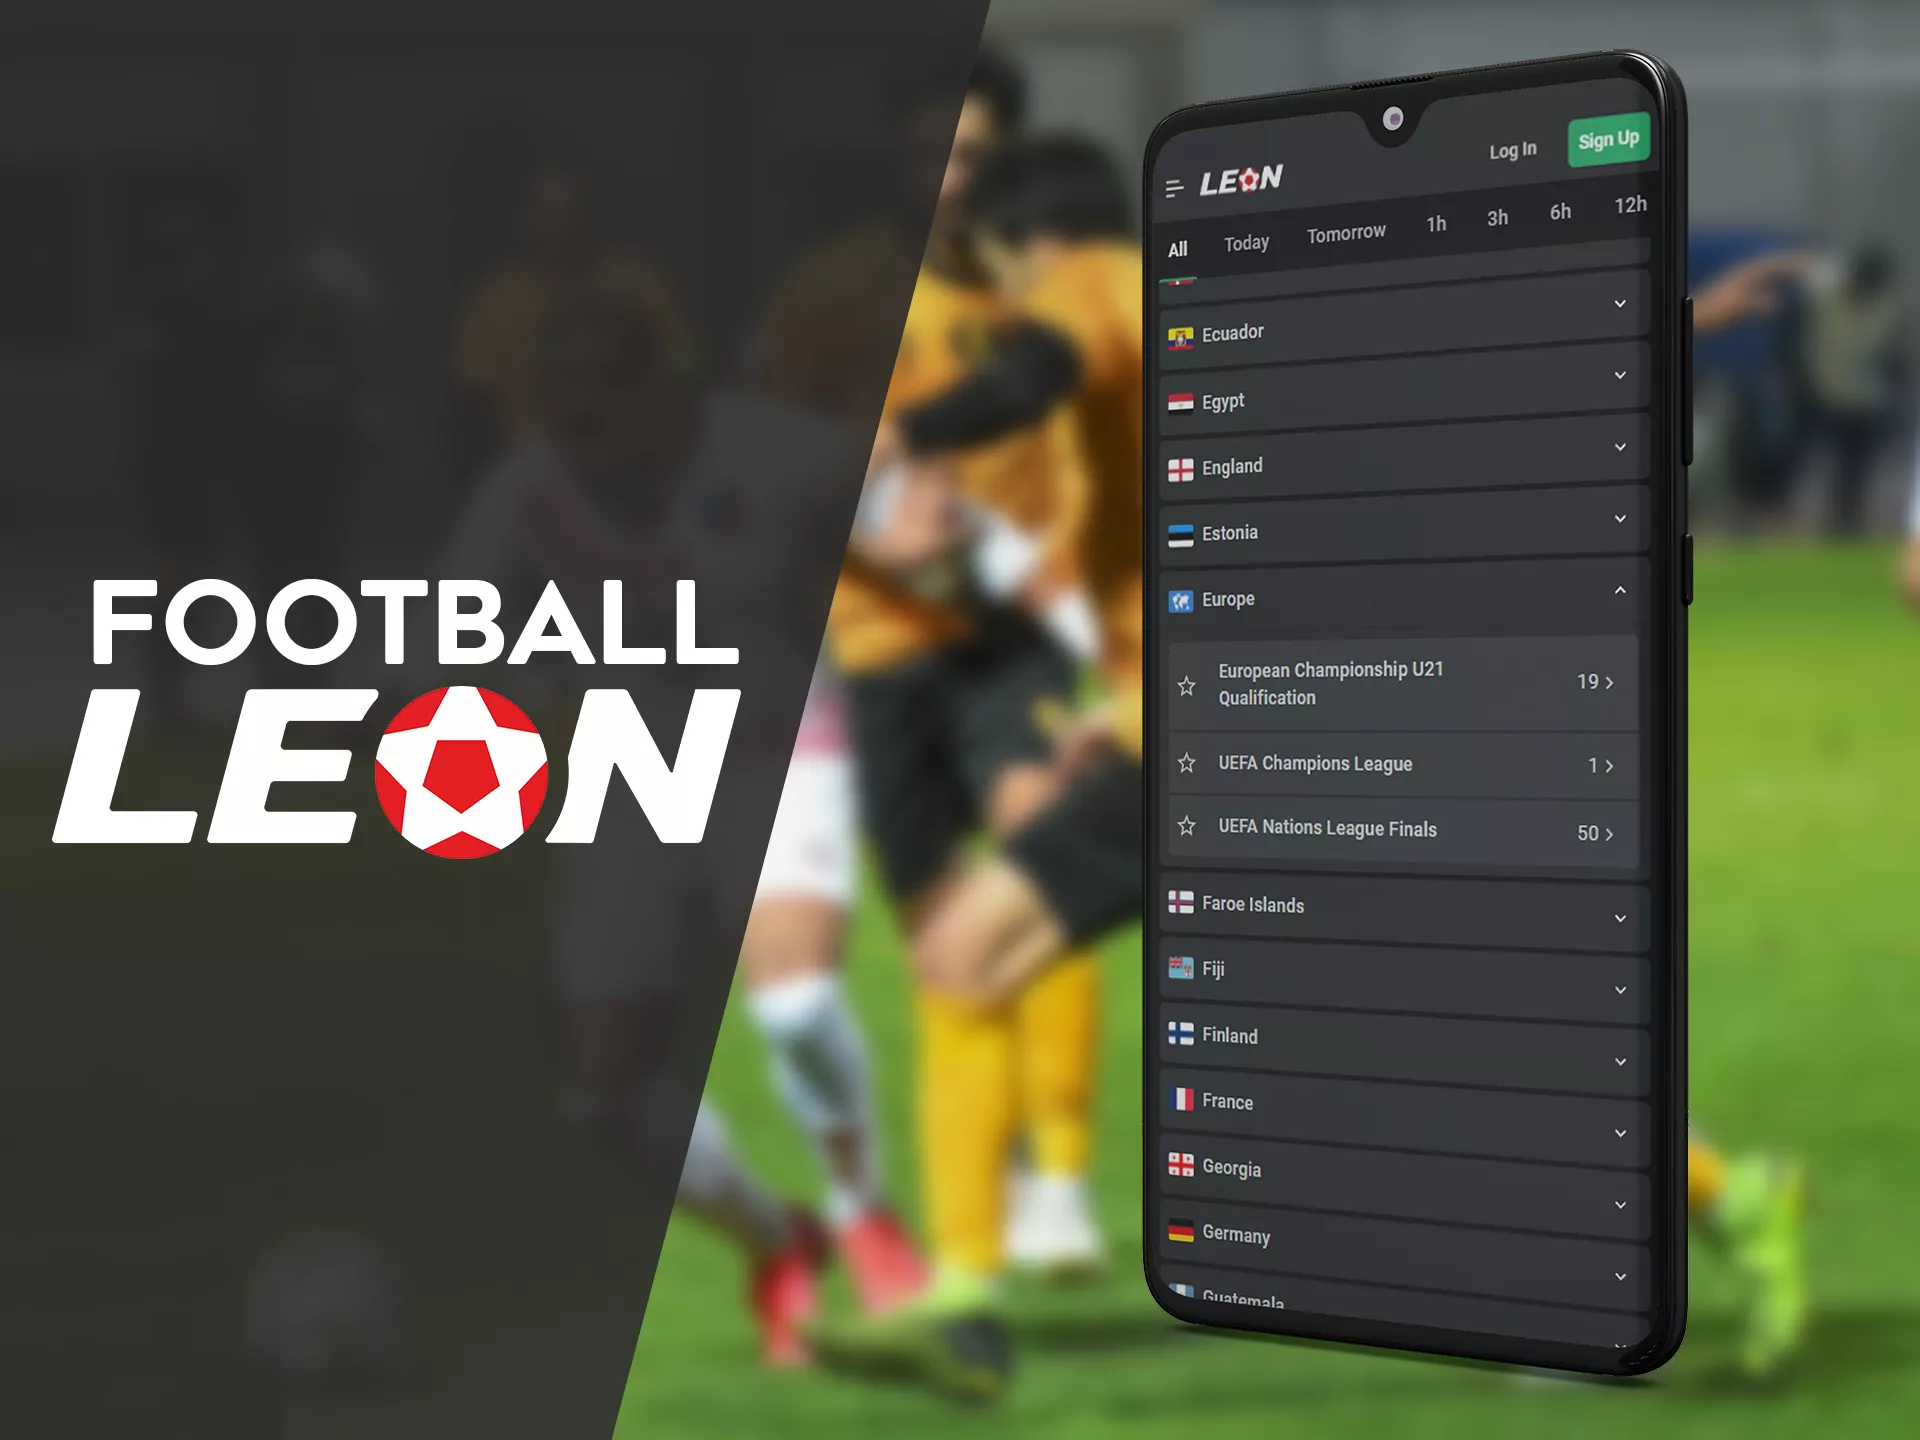 Place bets on football teams and leagues in the Leonbet app.